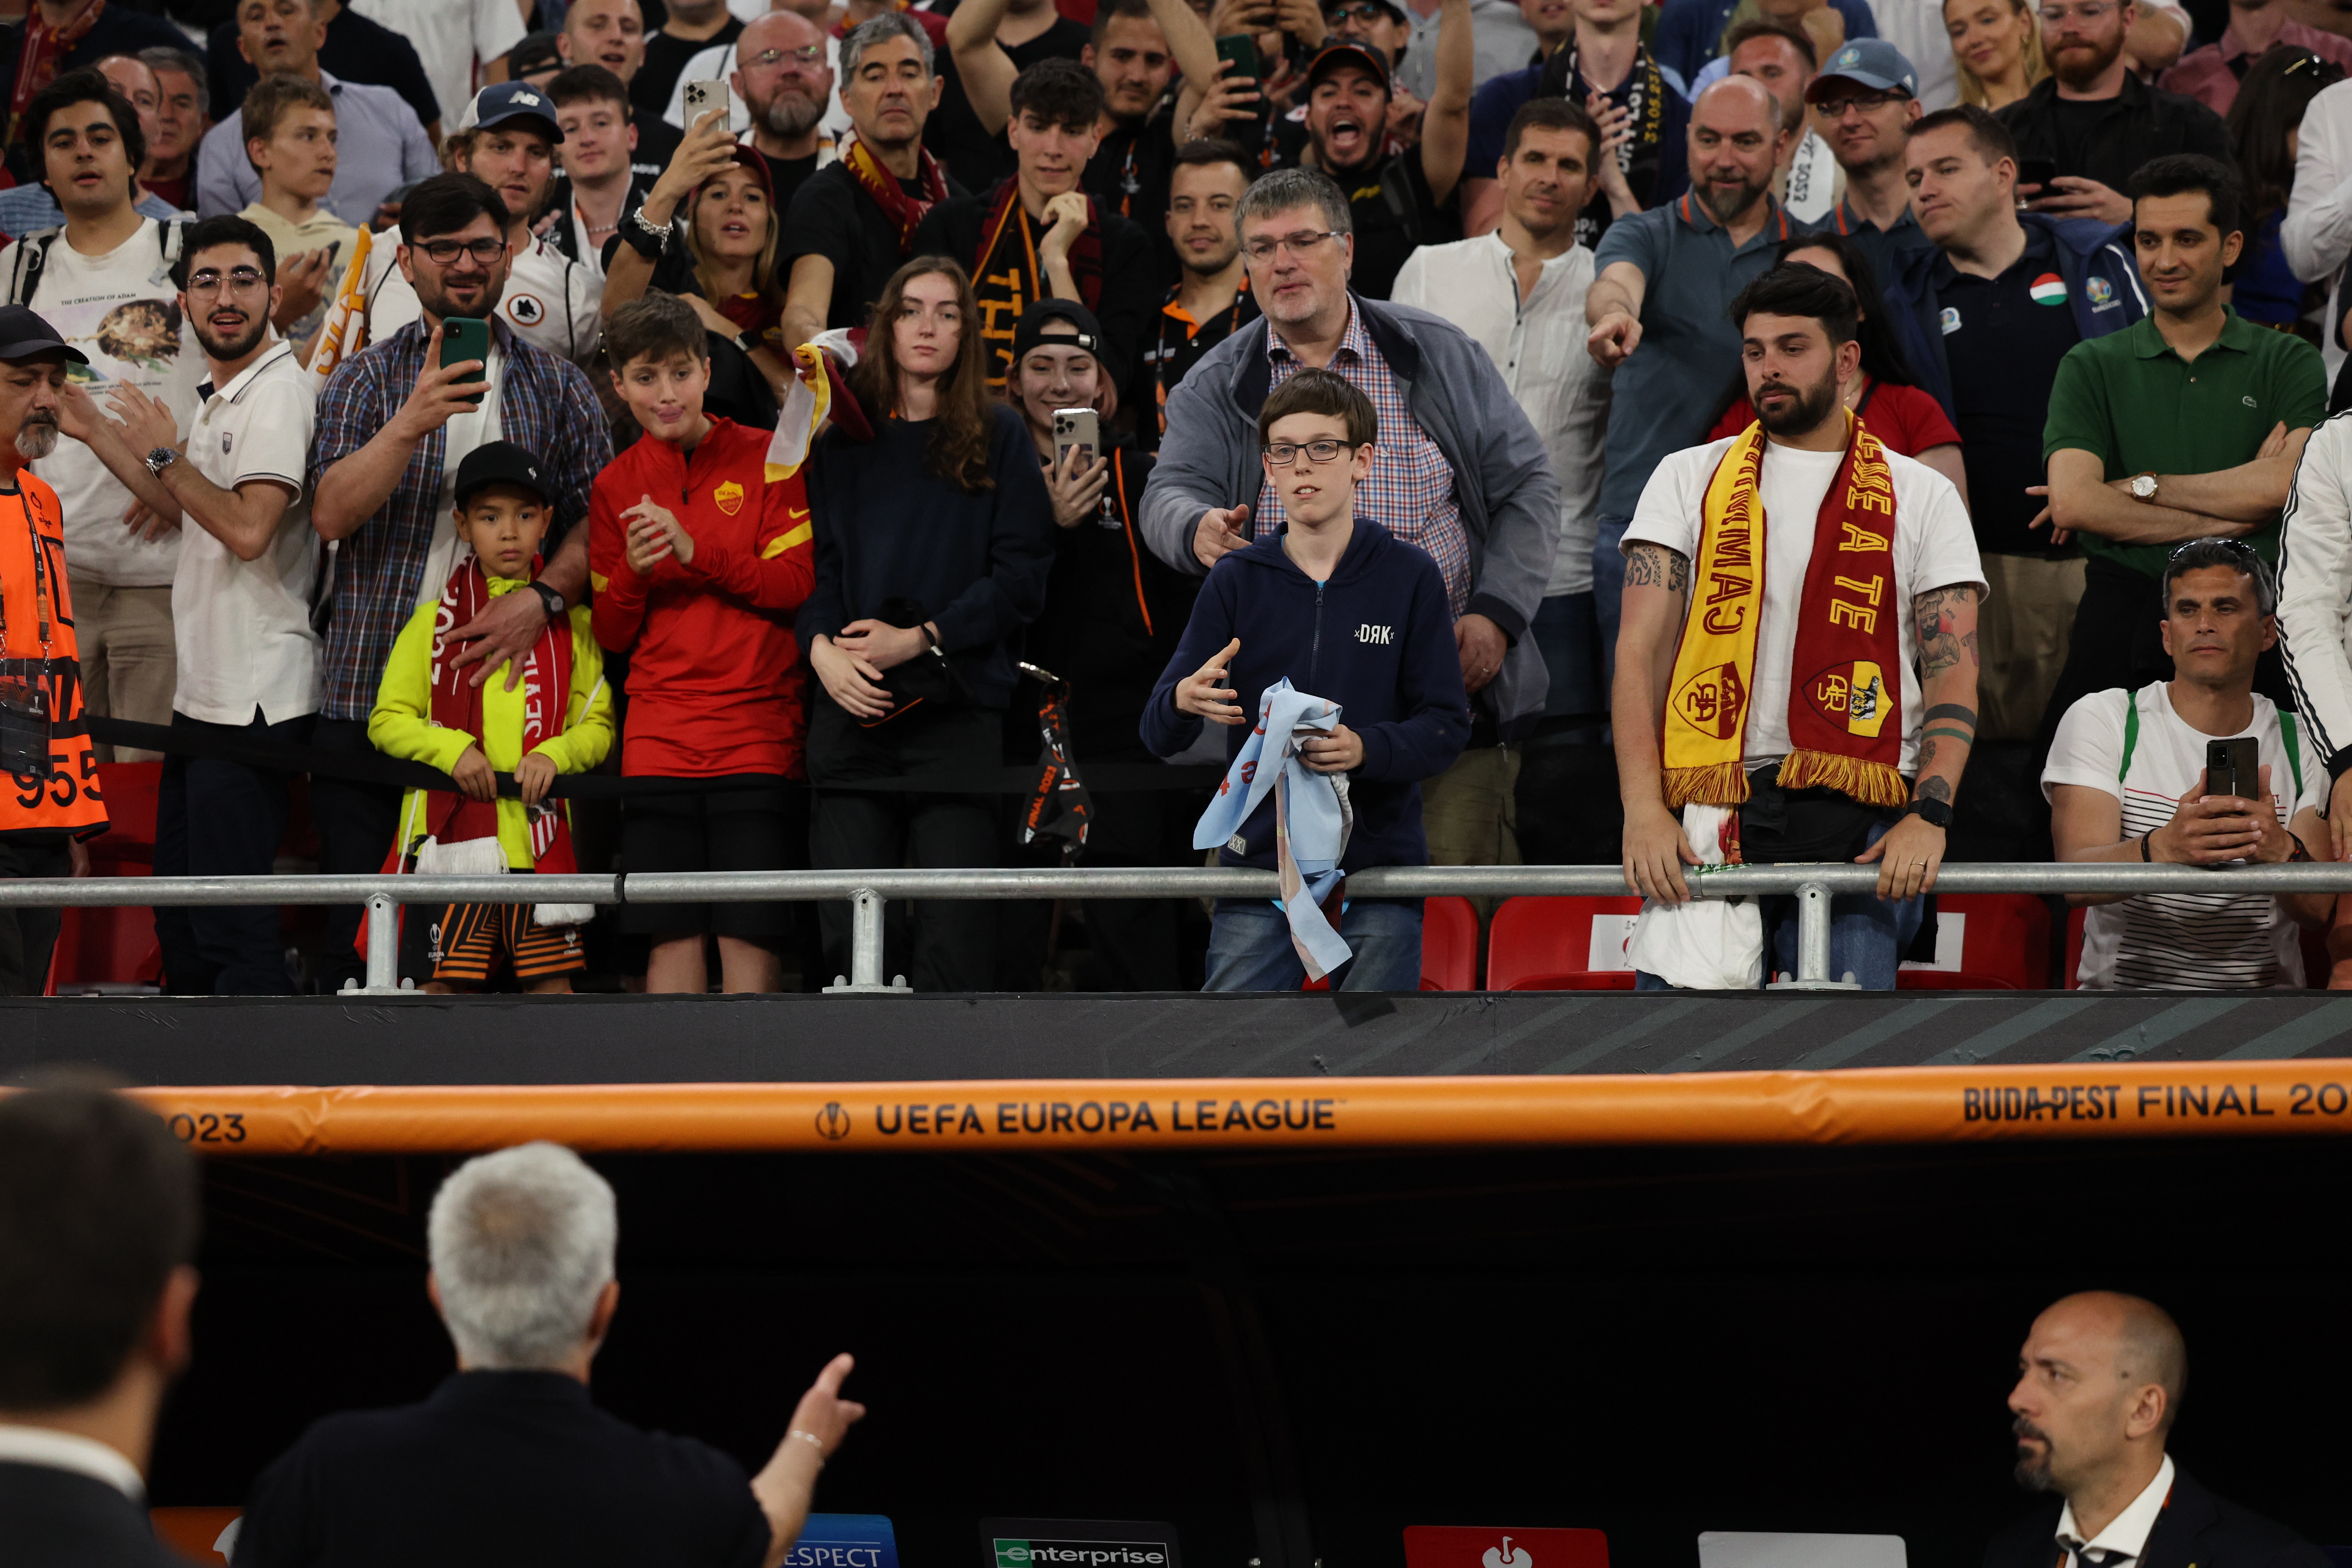 Mourinho Throws Medal Into Stands After Europa League Final - iDiski Times